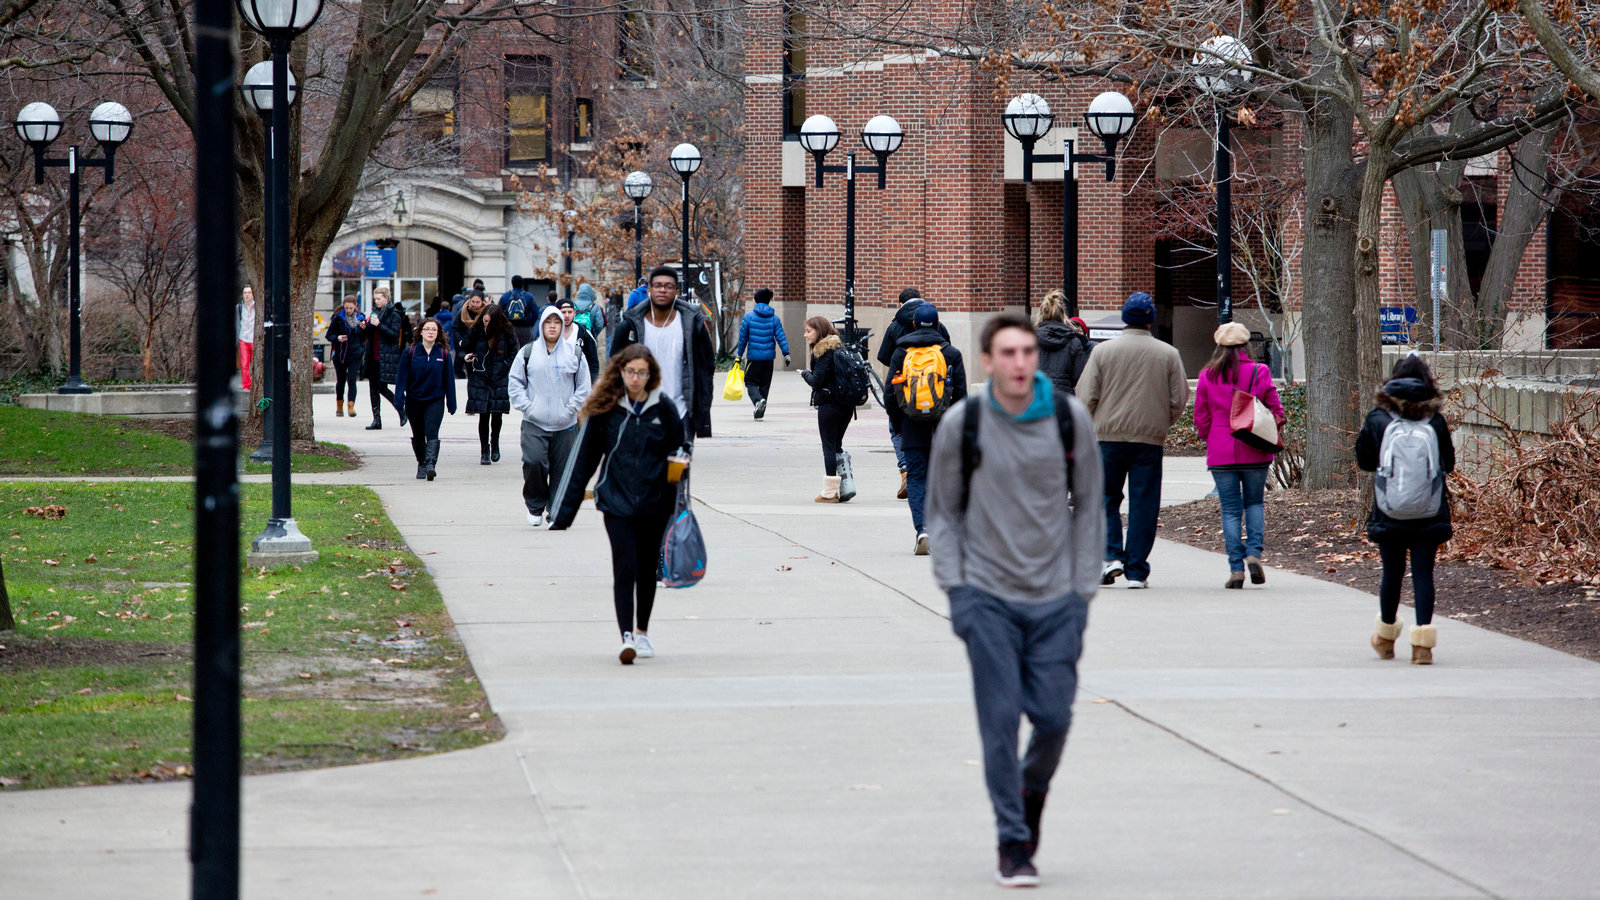 The University of Michigan Advised Students to Stay at Home Due to New Covid-19 Strain